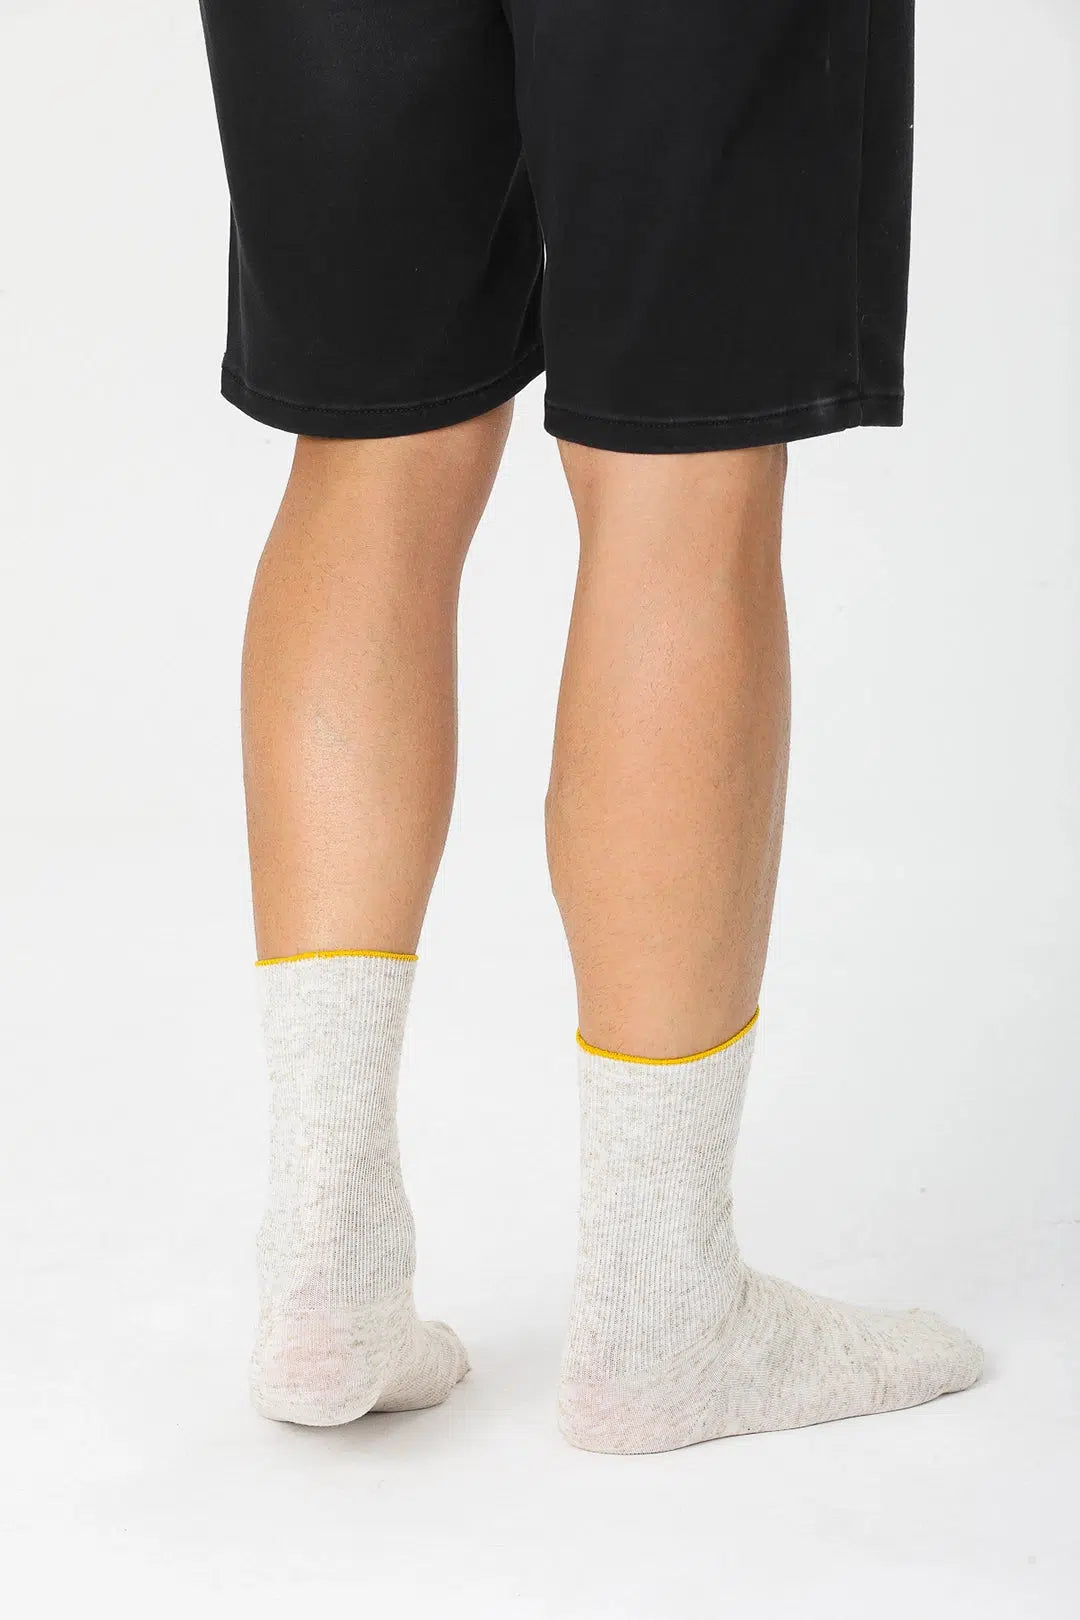 GoWith-thin-diabetic-dress-socks